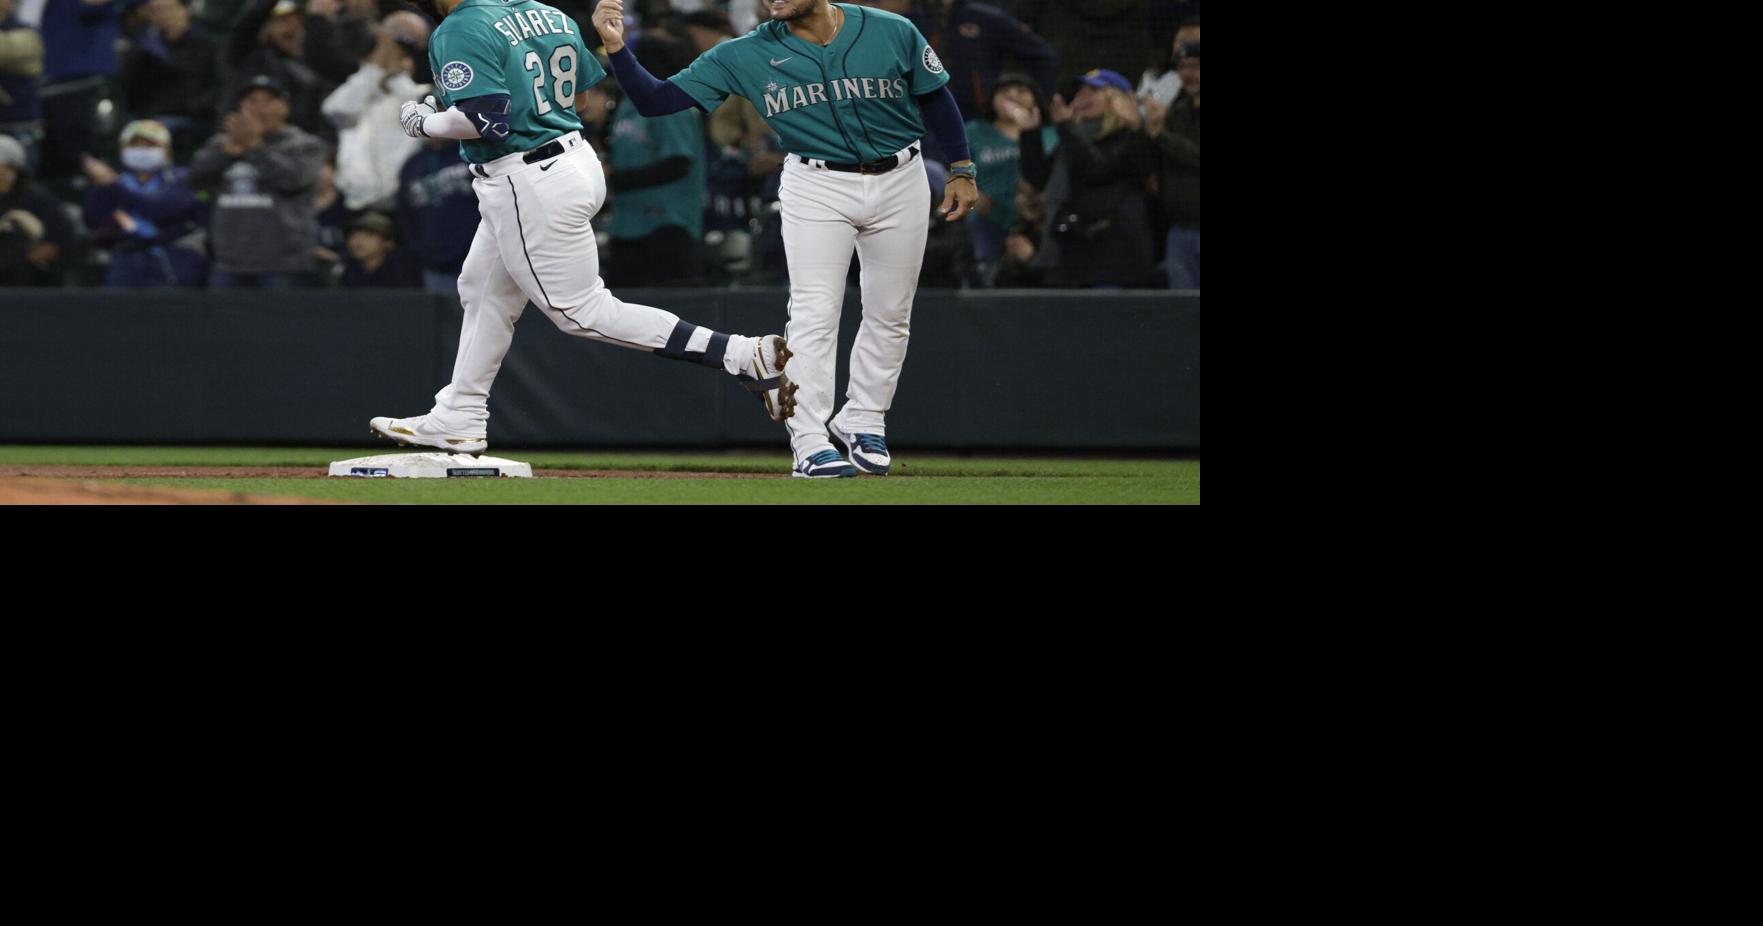 Adam Frazier gives the Mariners the lead with an RBI double in the 9th! :  r/baseball